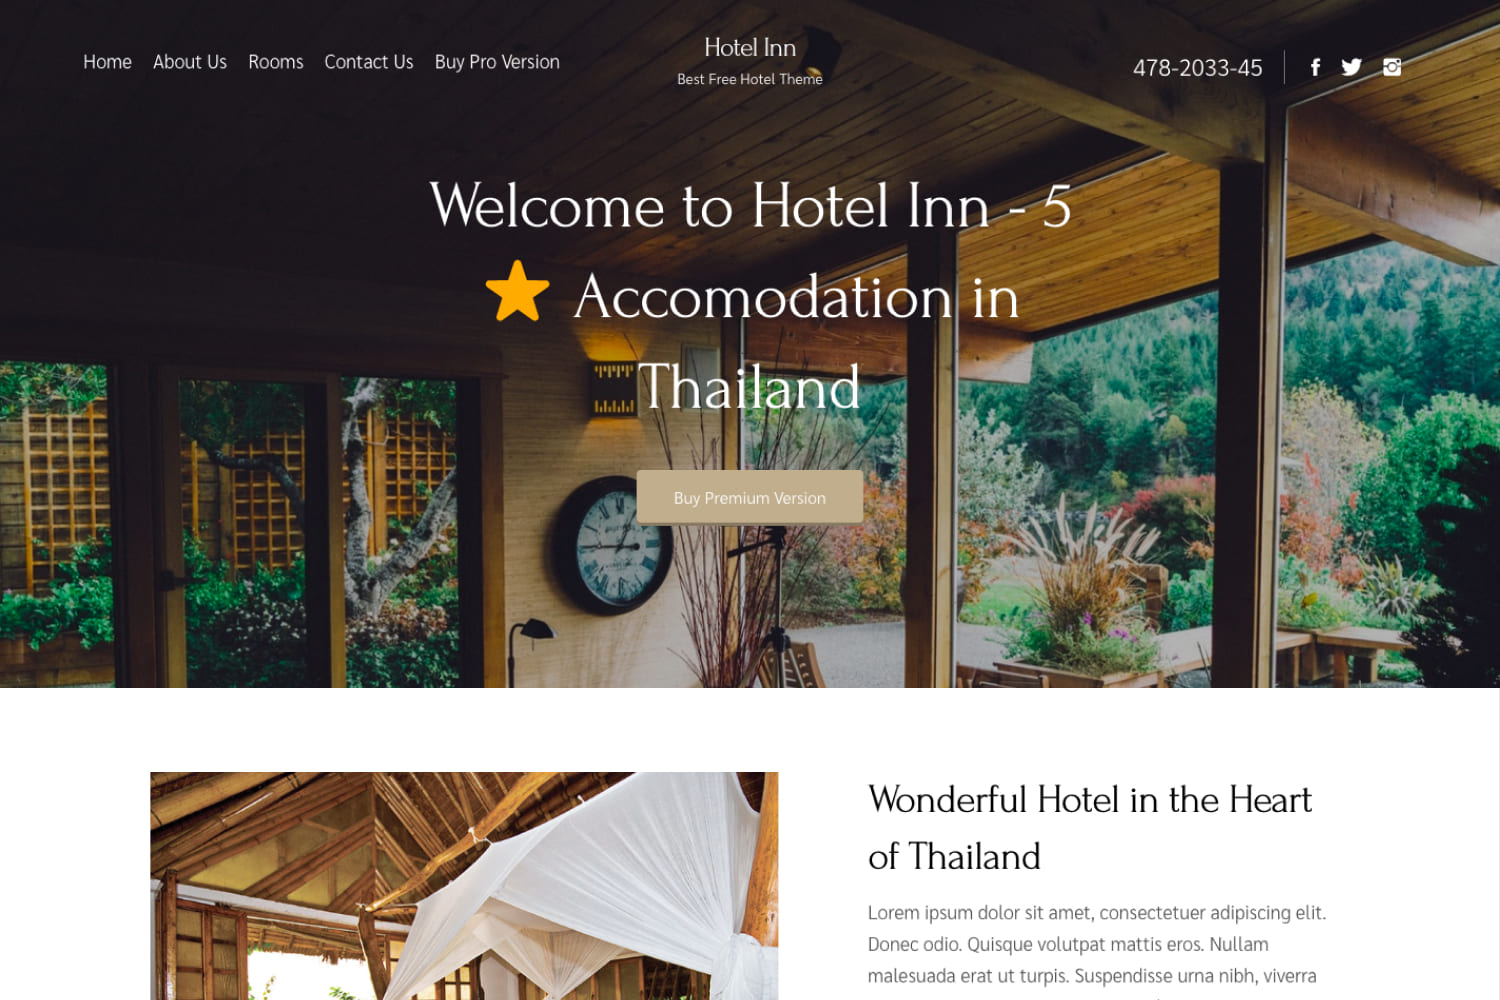 The main page of the hotel website with a photo of the hotel in the forest and a description.